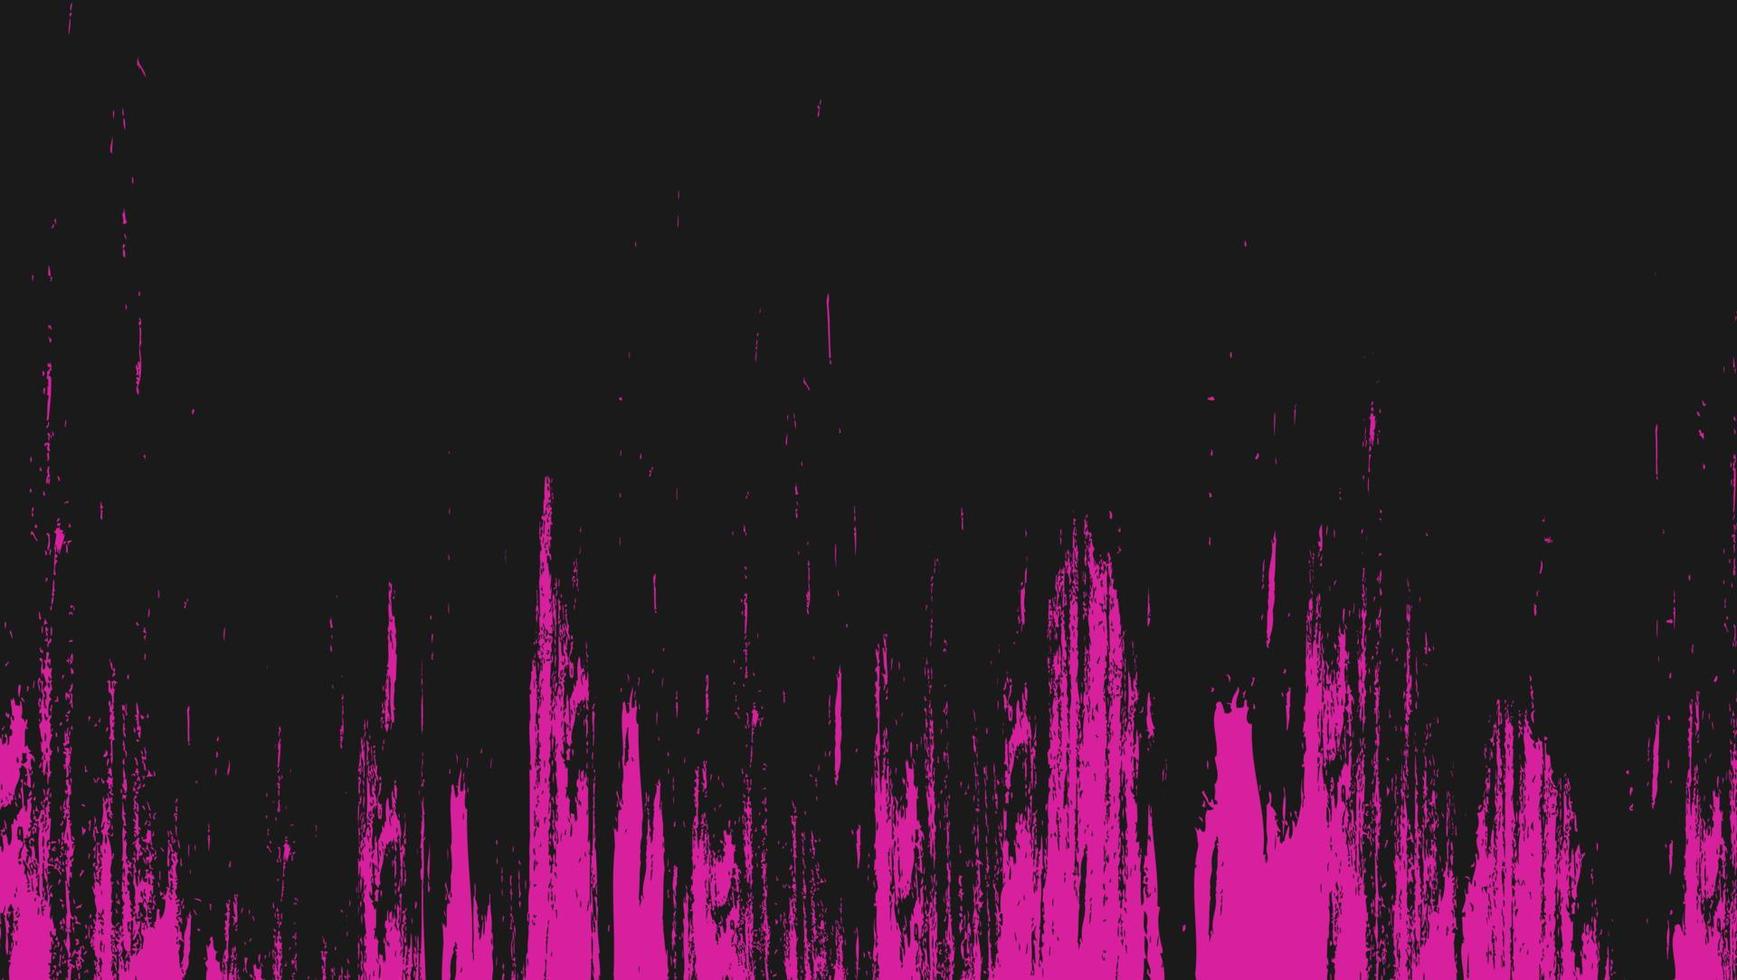 Abstract Dynamic Pink Grunge Texture In Black Background vector